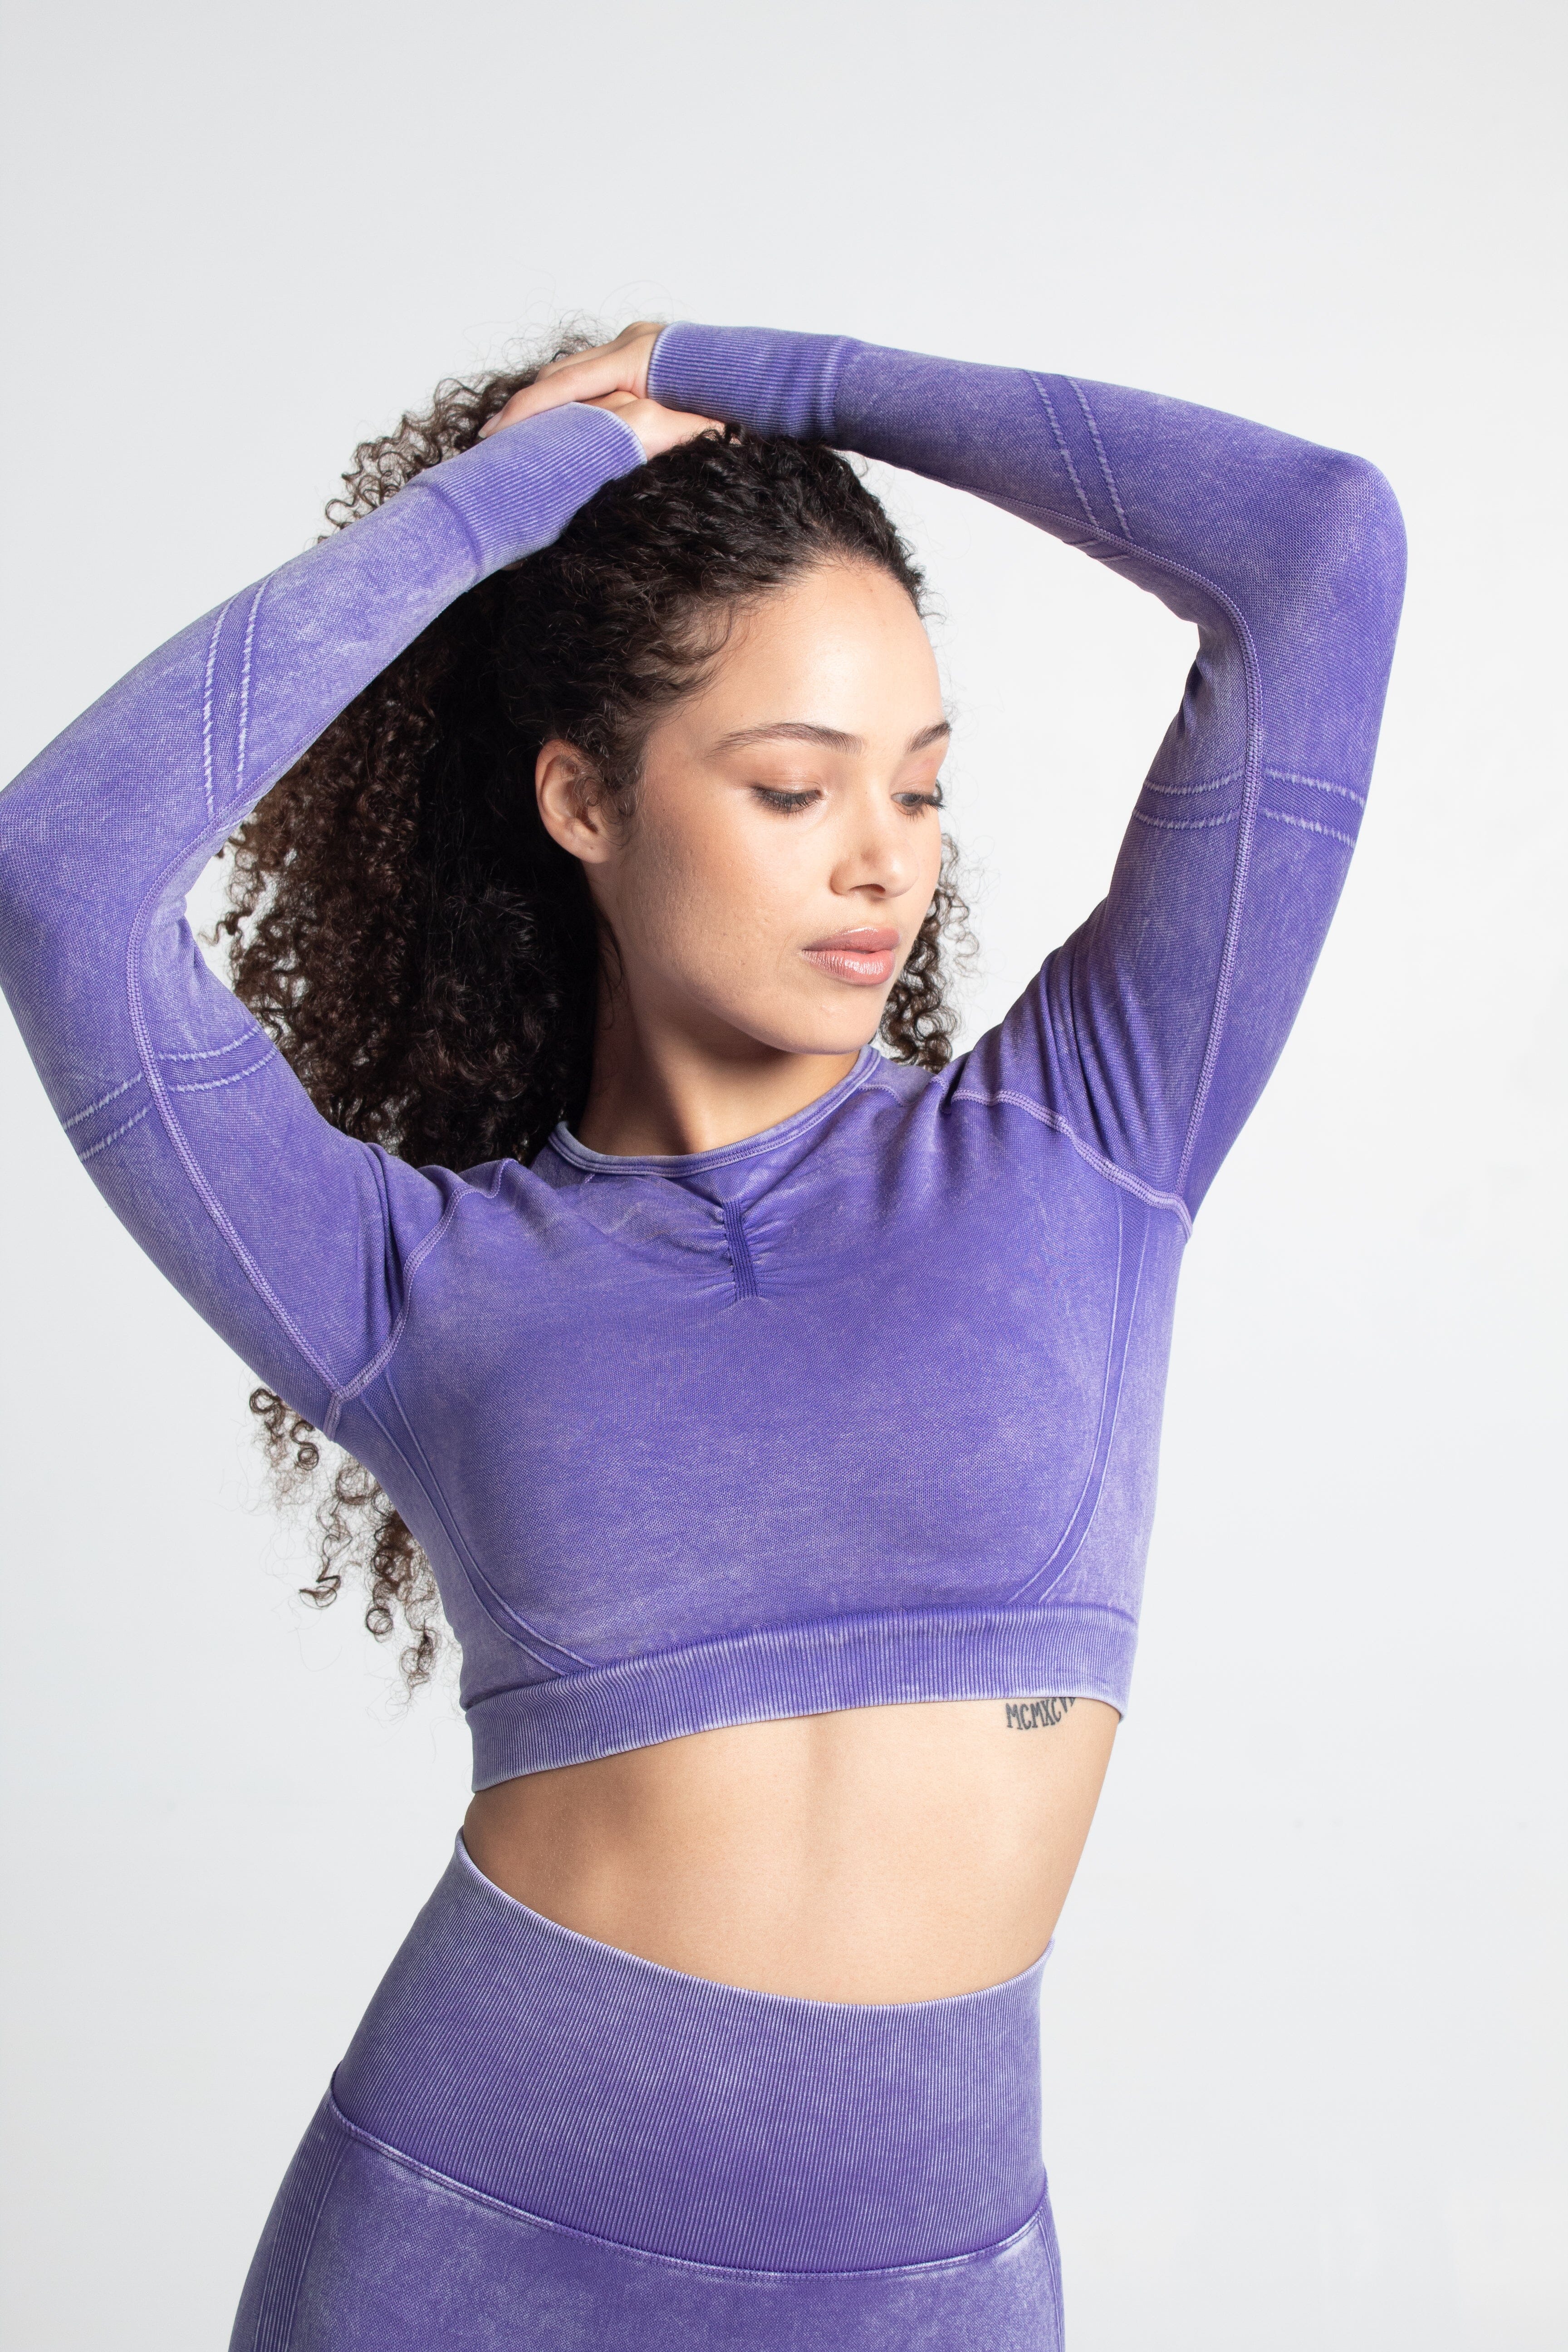 Feather Seamless Top Top Starlethics Purple Kim S 